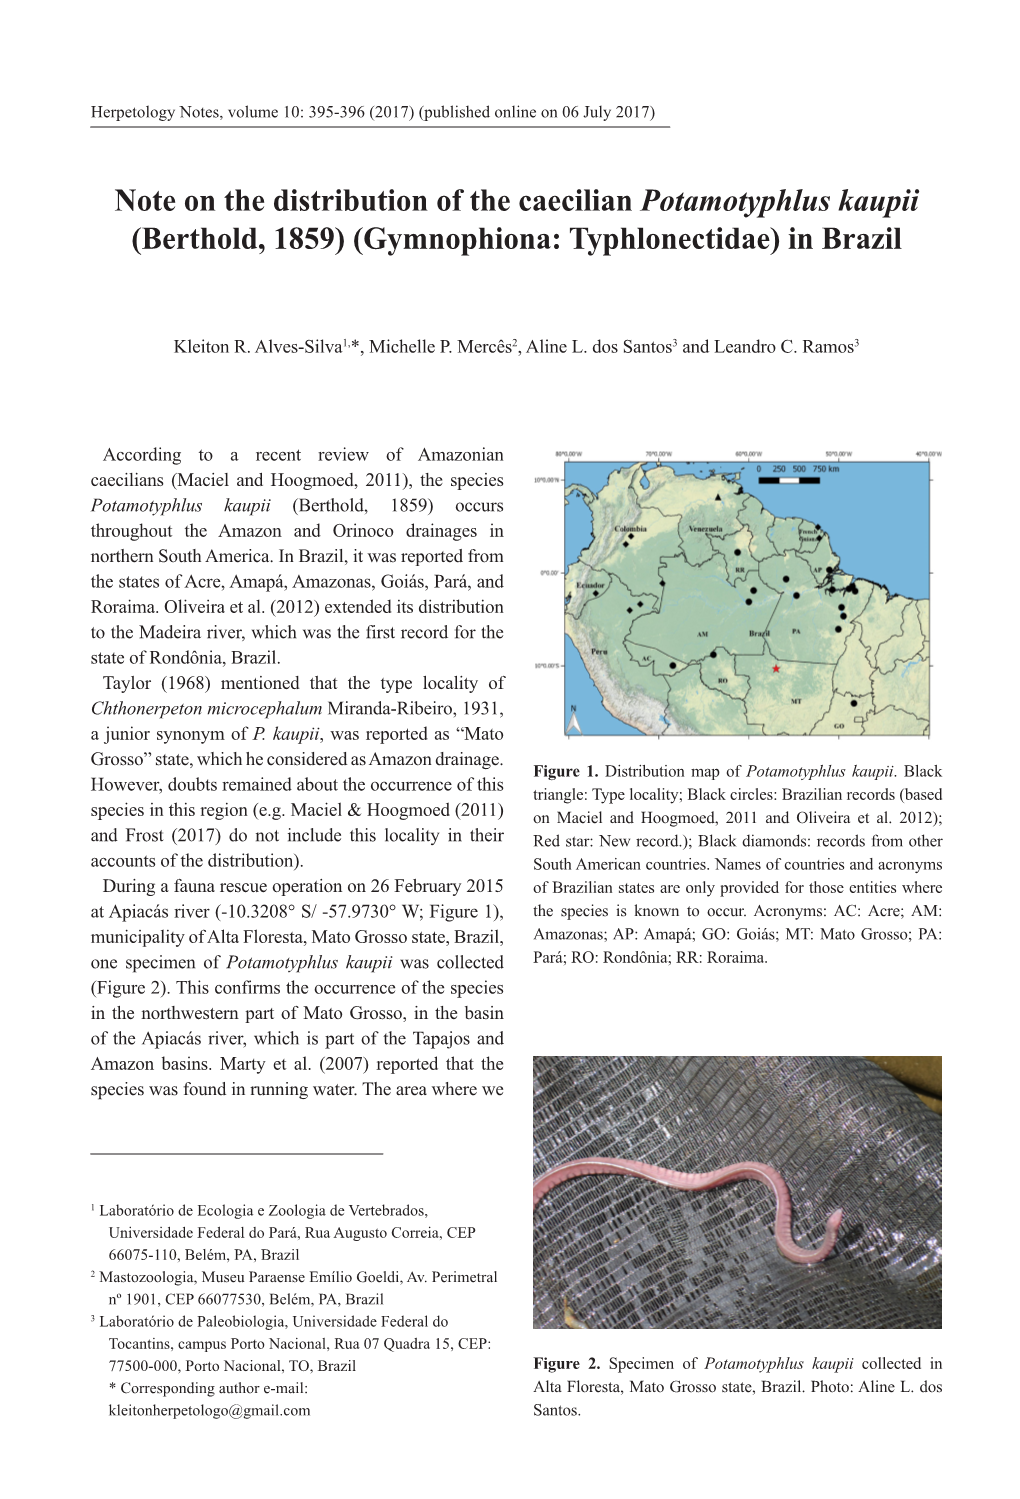 Note on the Distribution of the Caecilian Potamotyphlus Kaupii (Berthold, 1859) (Gymnophiona: Typhlonectidae) in Brazil